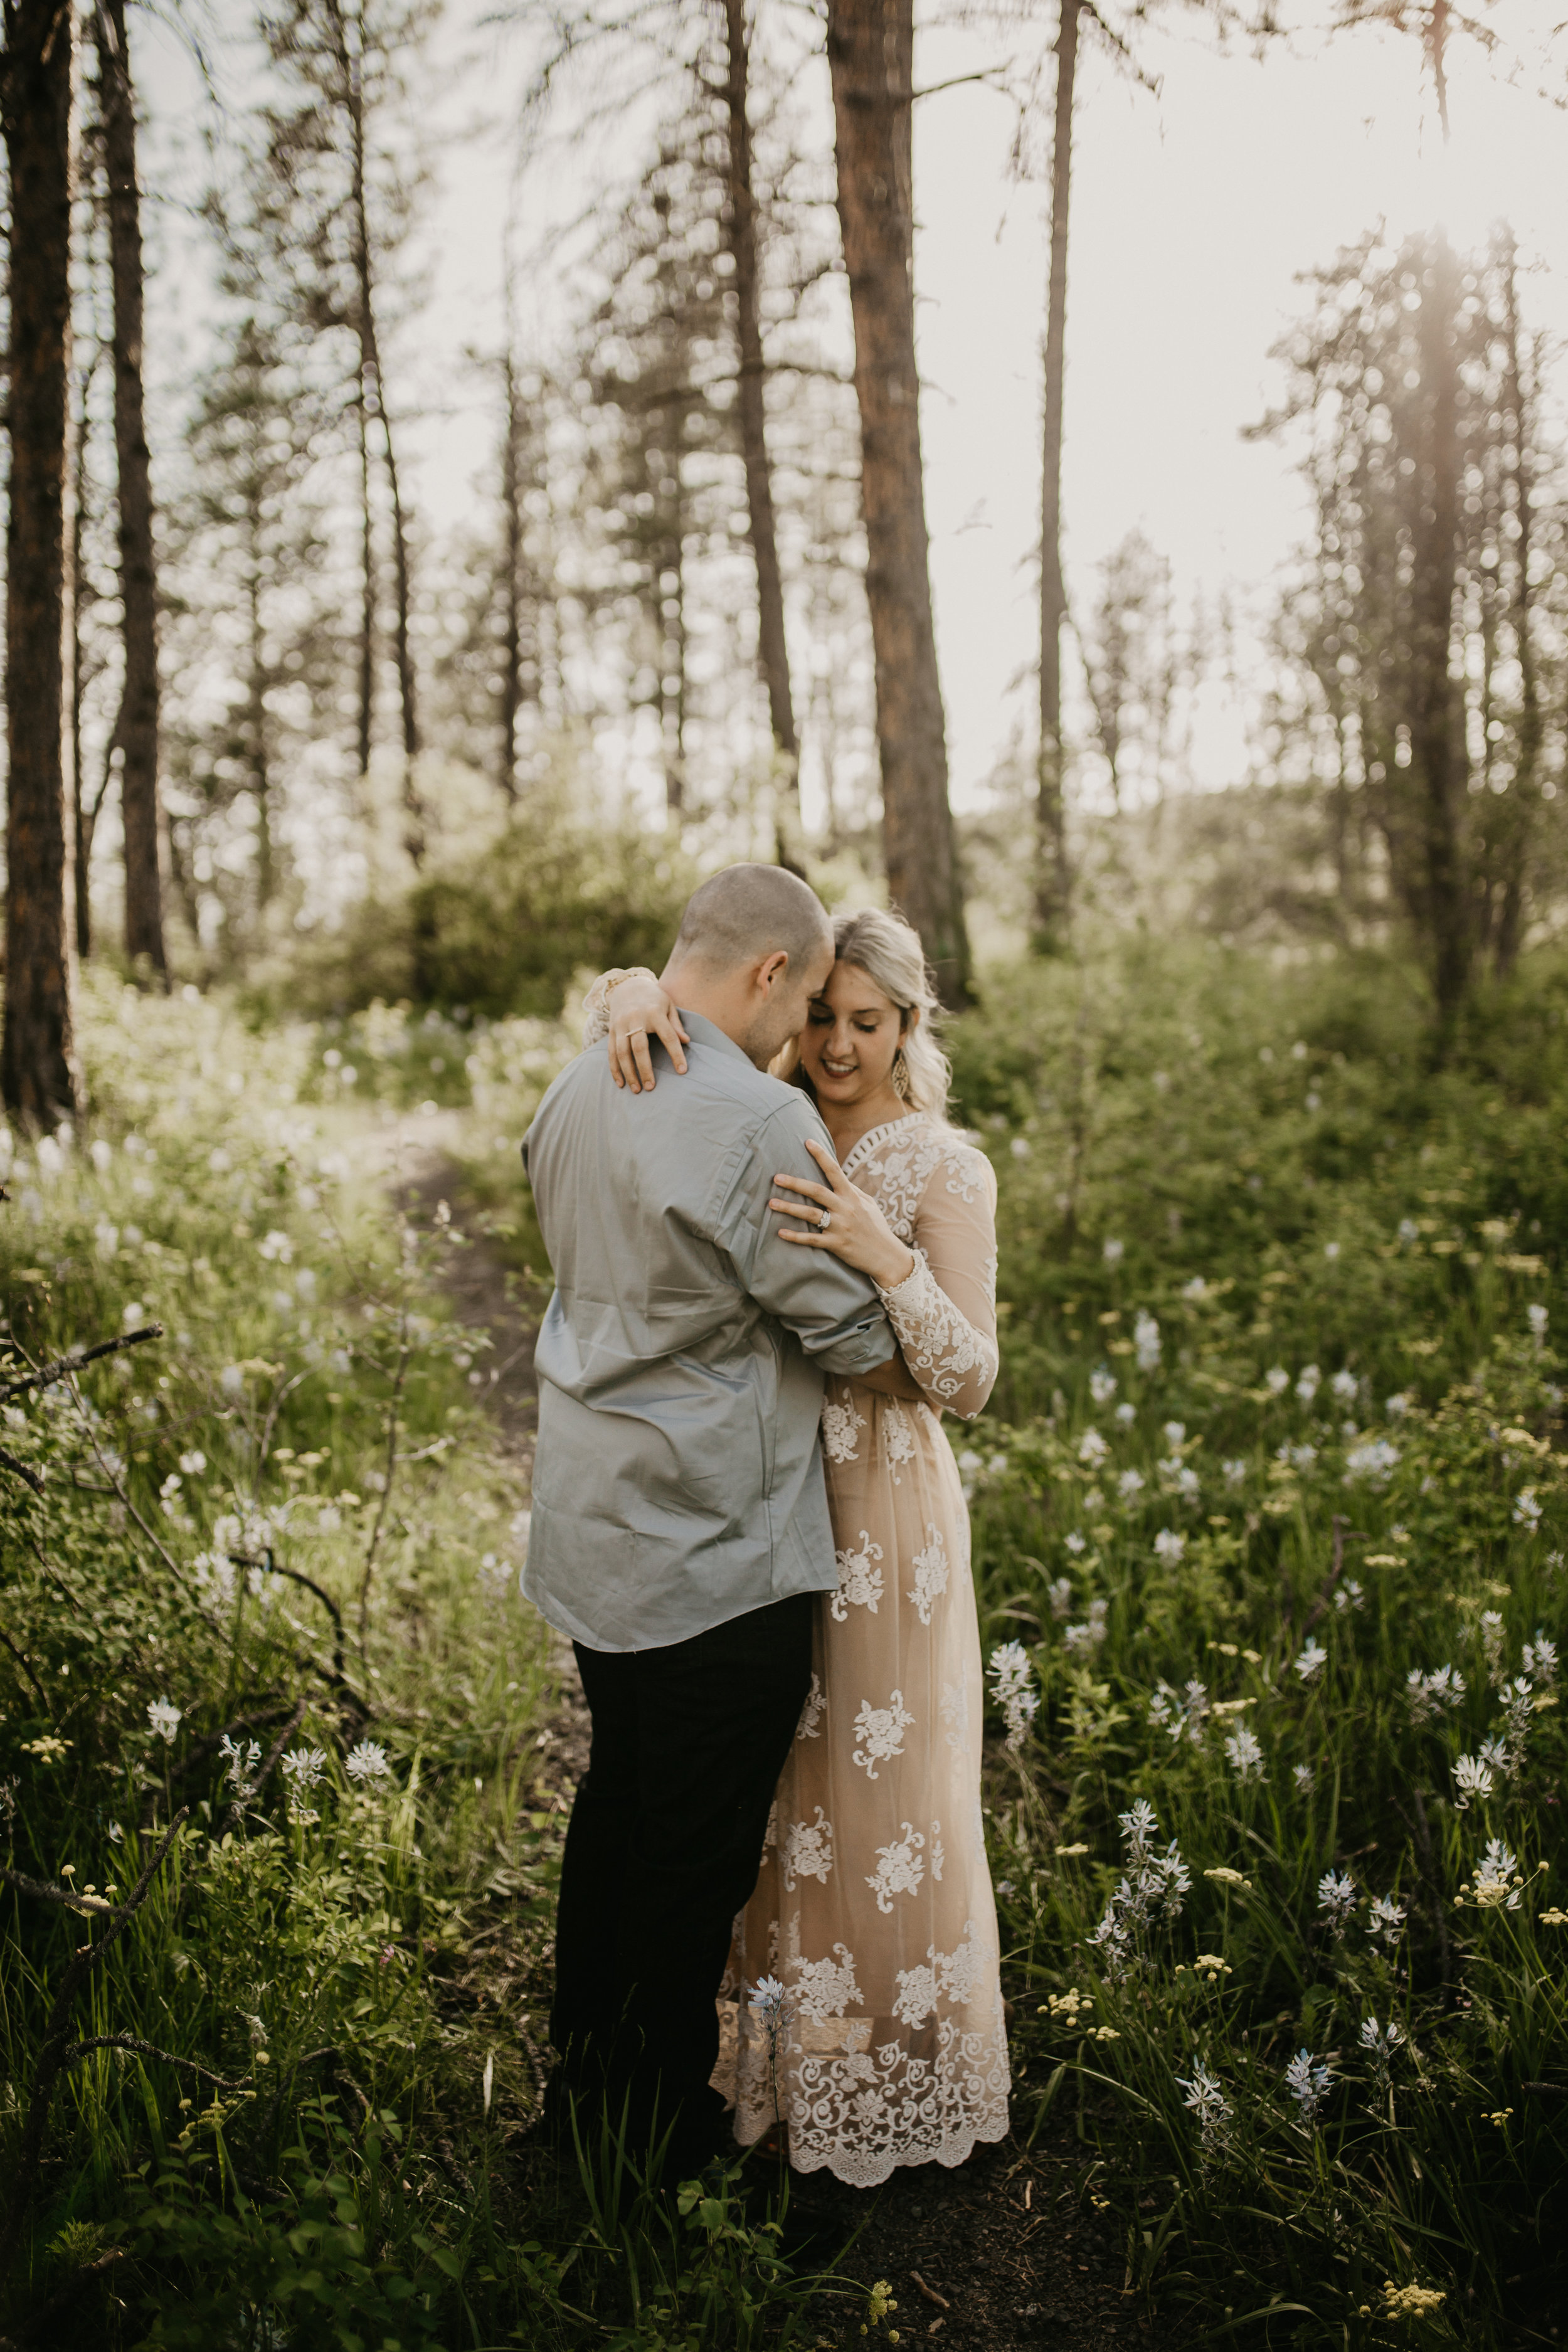  fiance giving his soon to be bride a hug in a field of wildflowers 